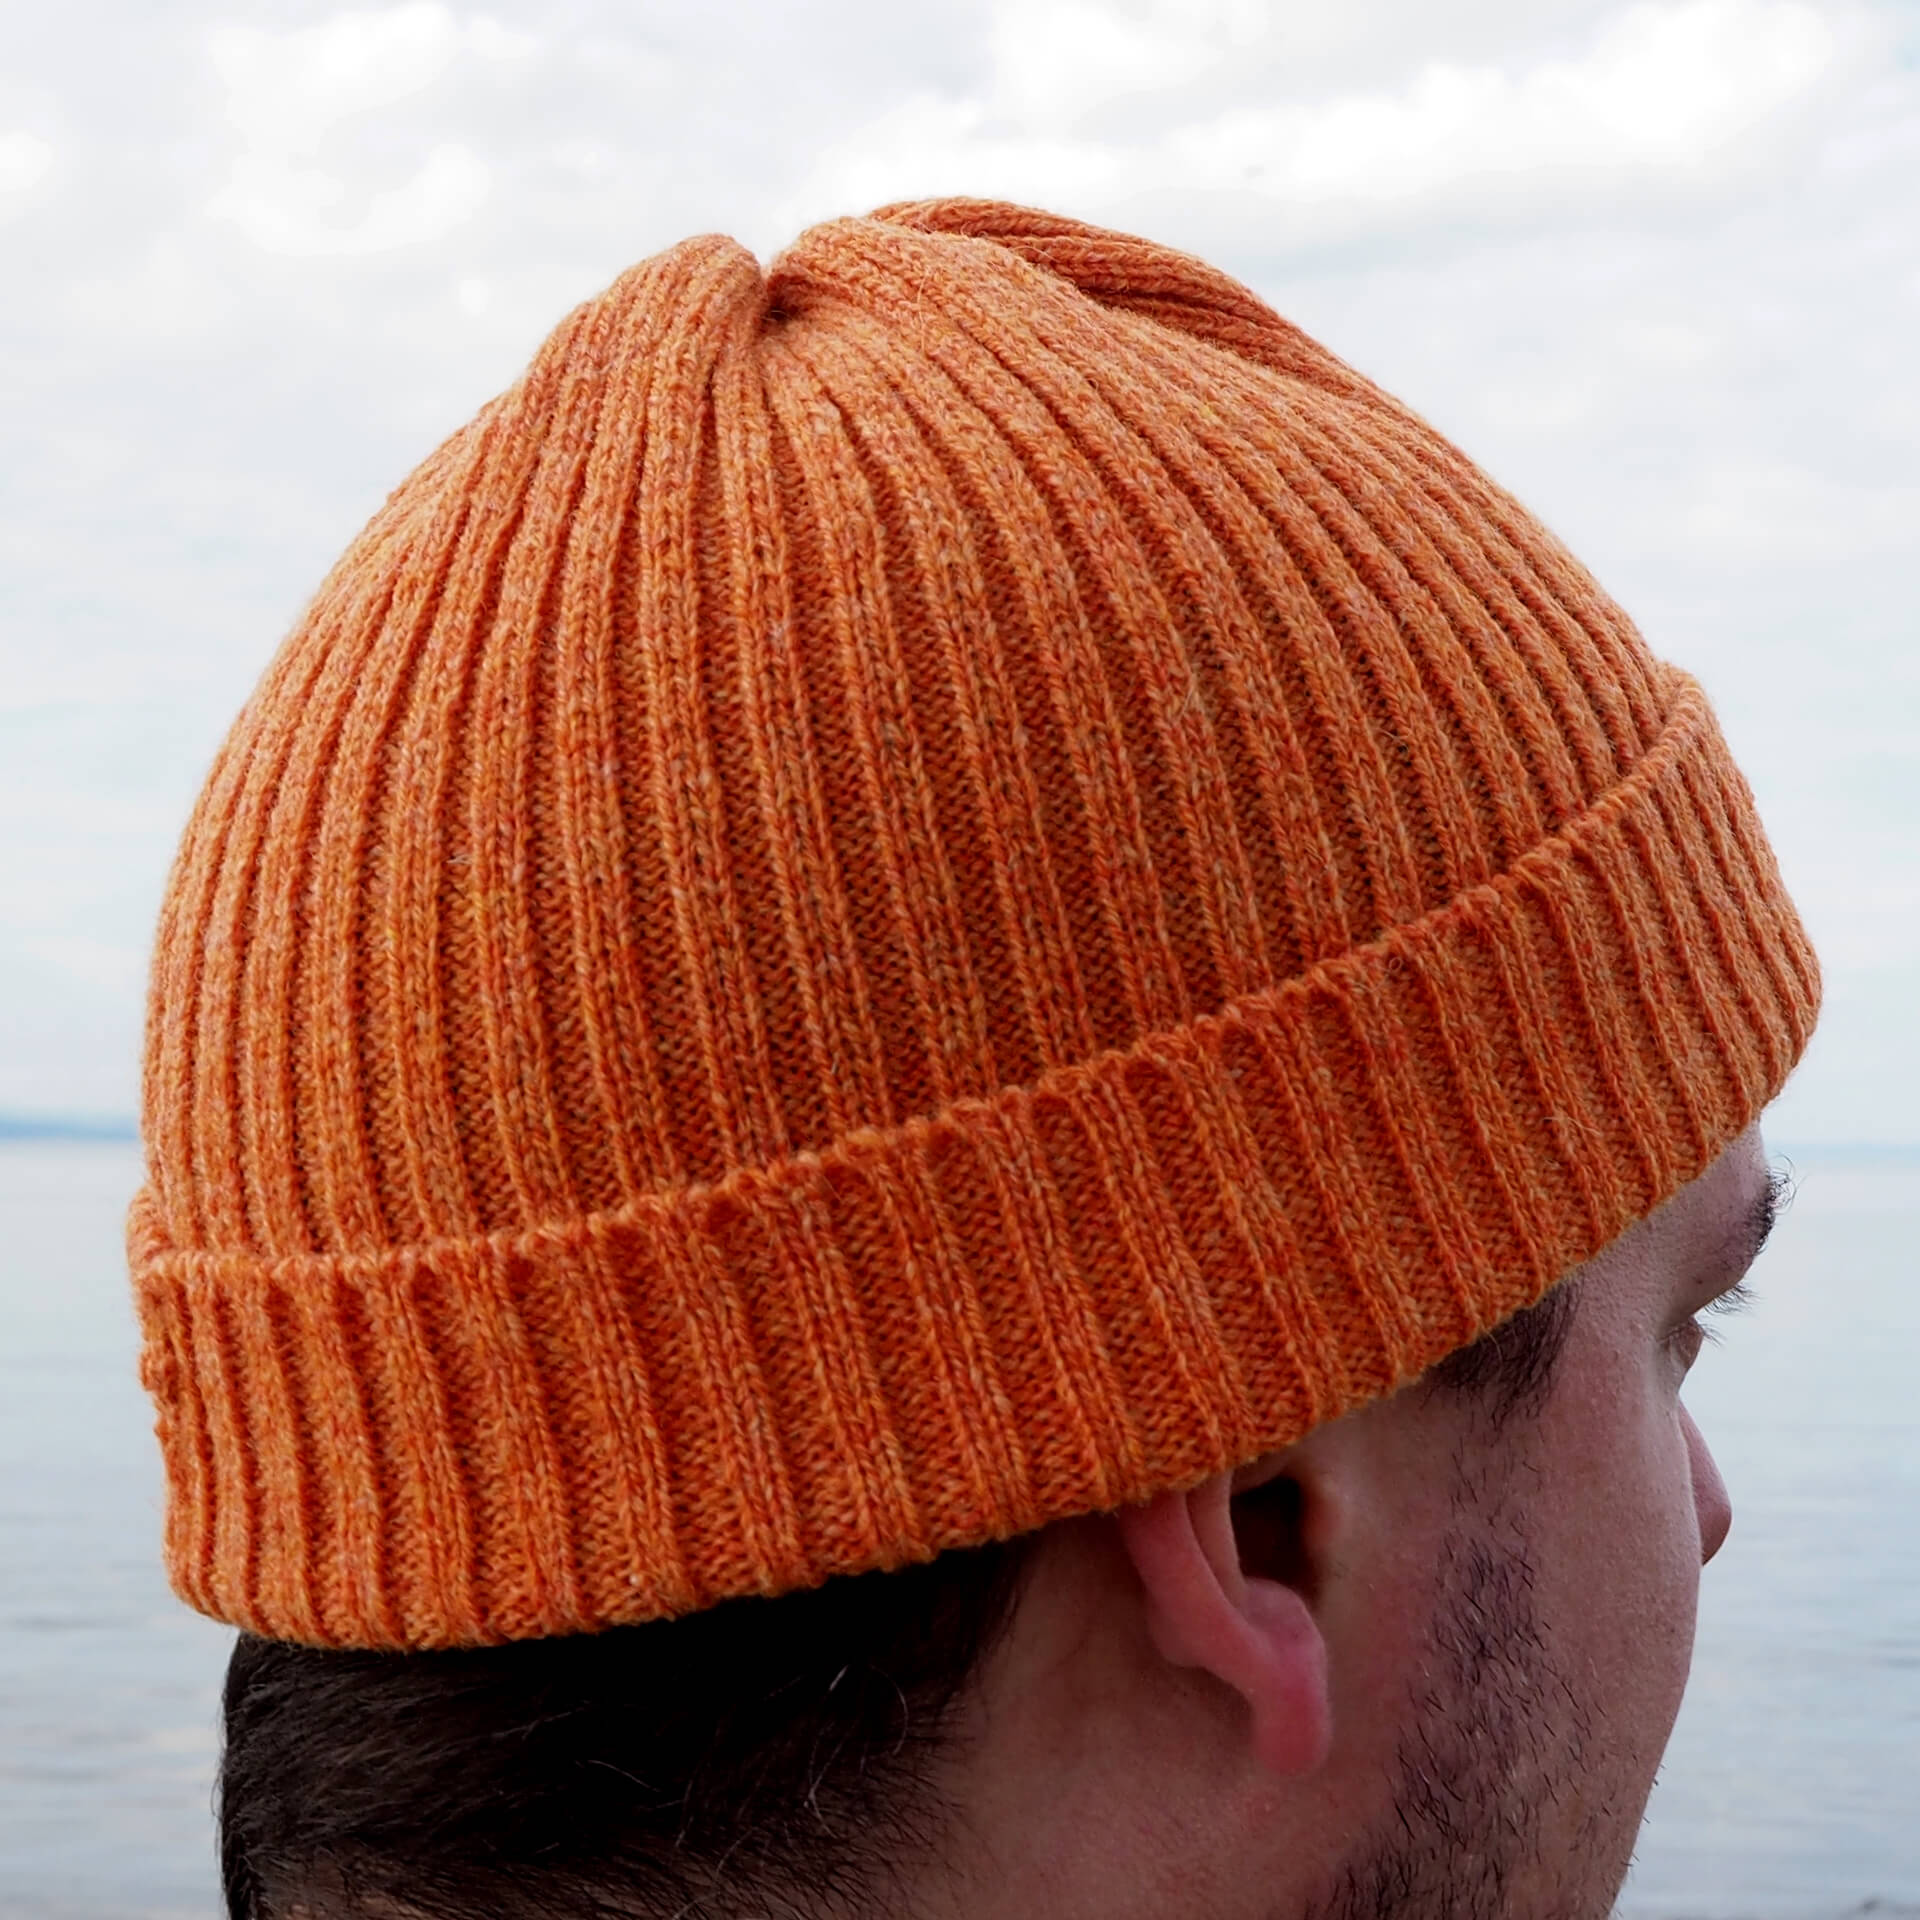 A man is wearing an orange ribbed beanie by K.Moods. He is looking away from the camera.